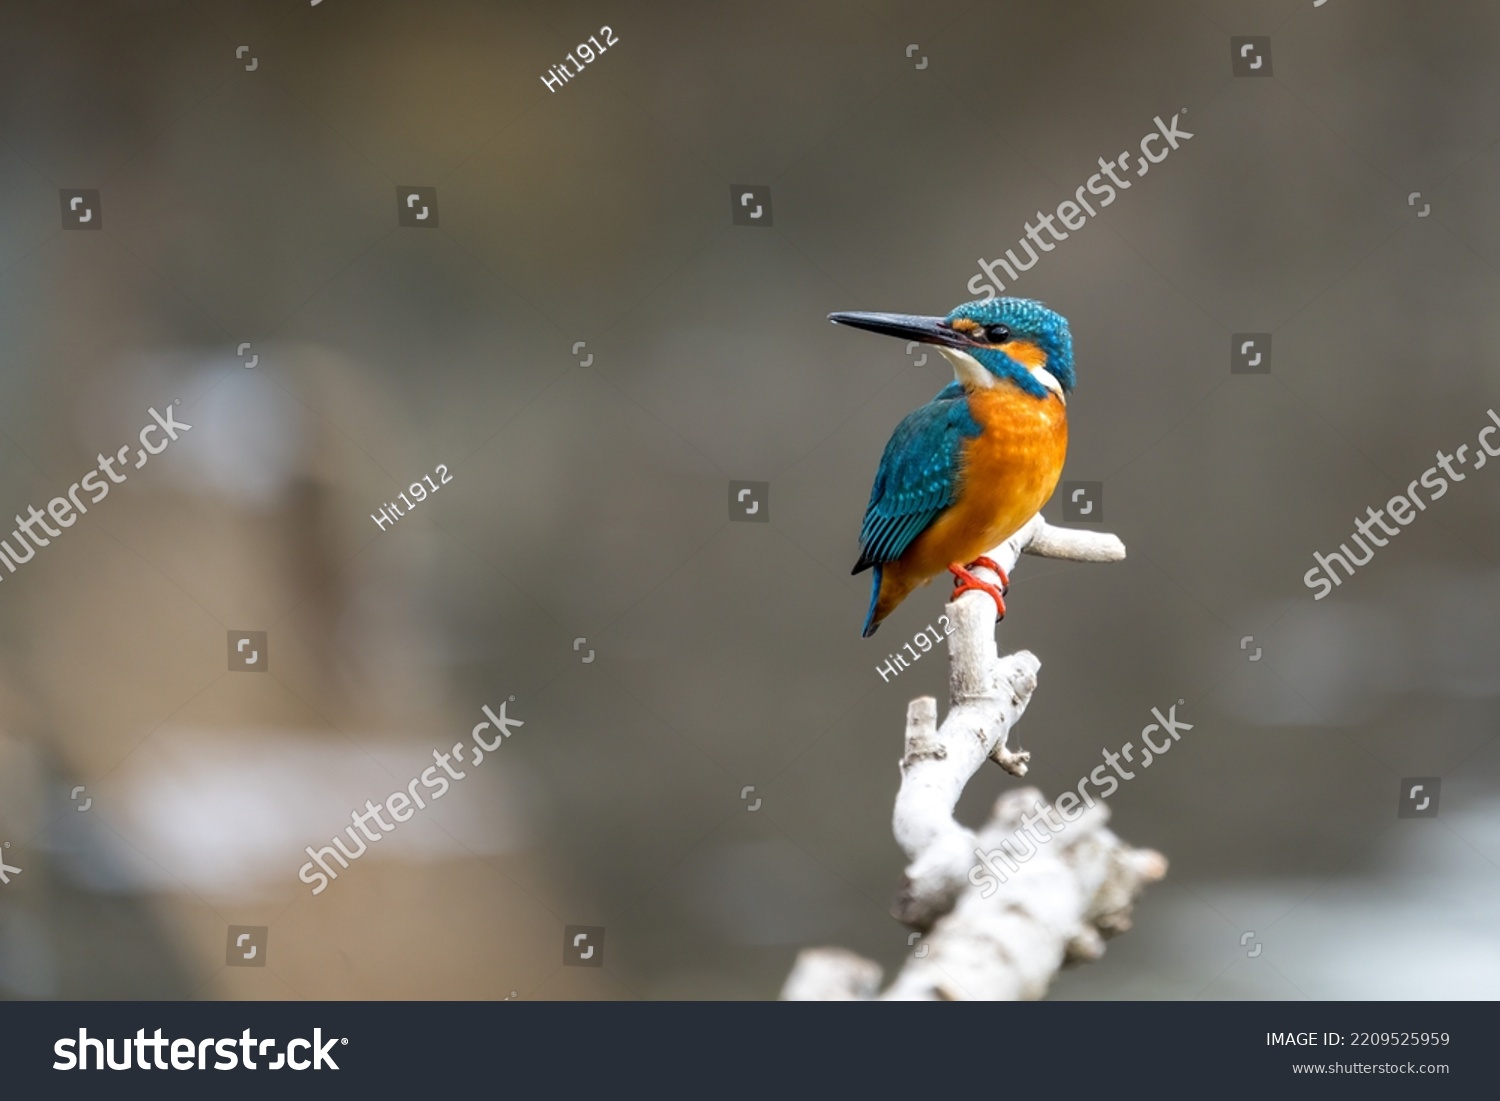 Close up image of male common Kingfisher perching on a tree branch. #2209525959